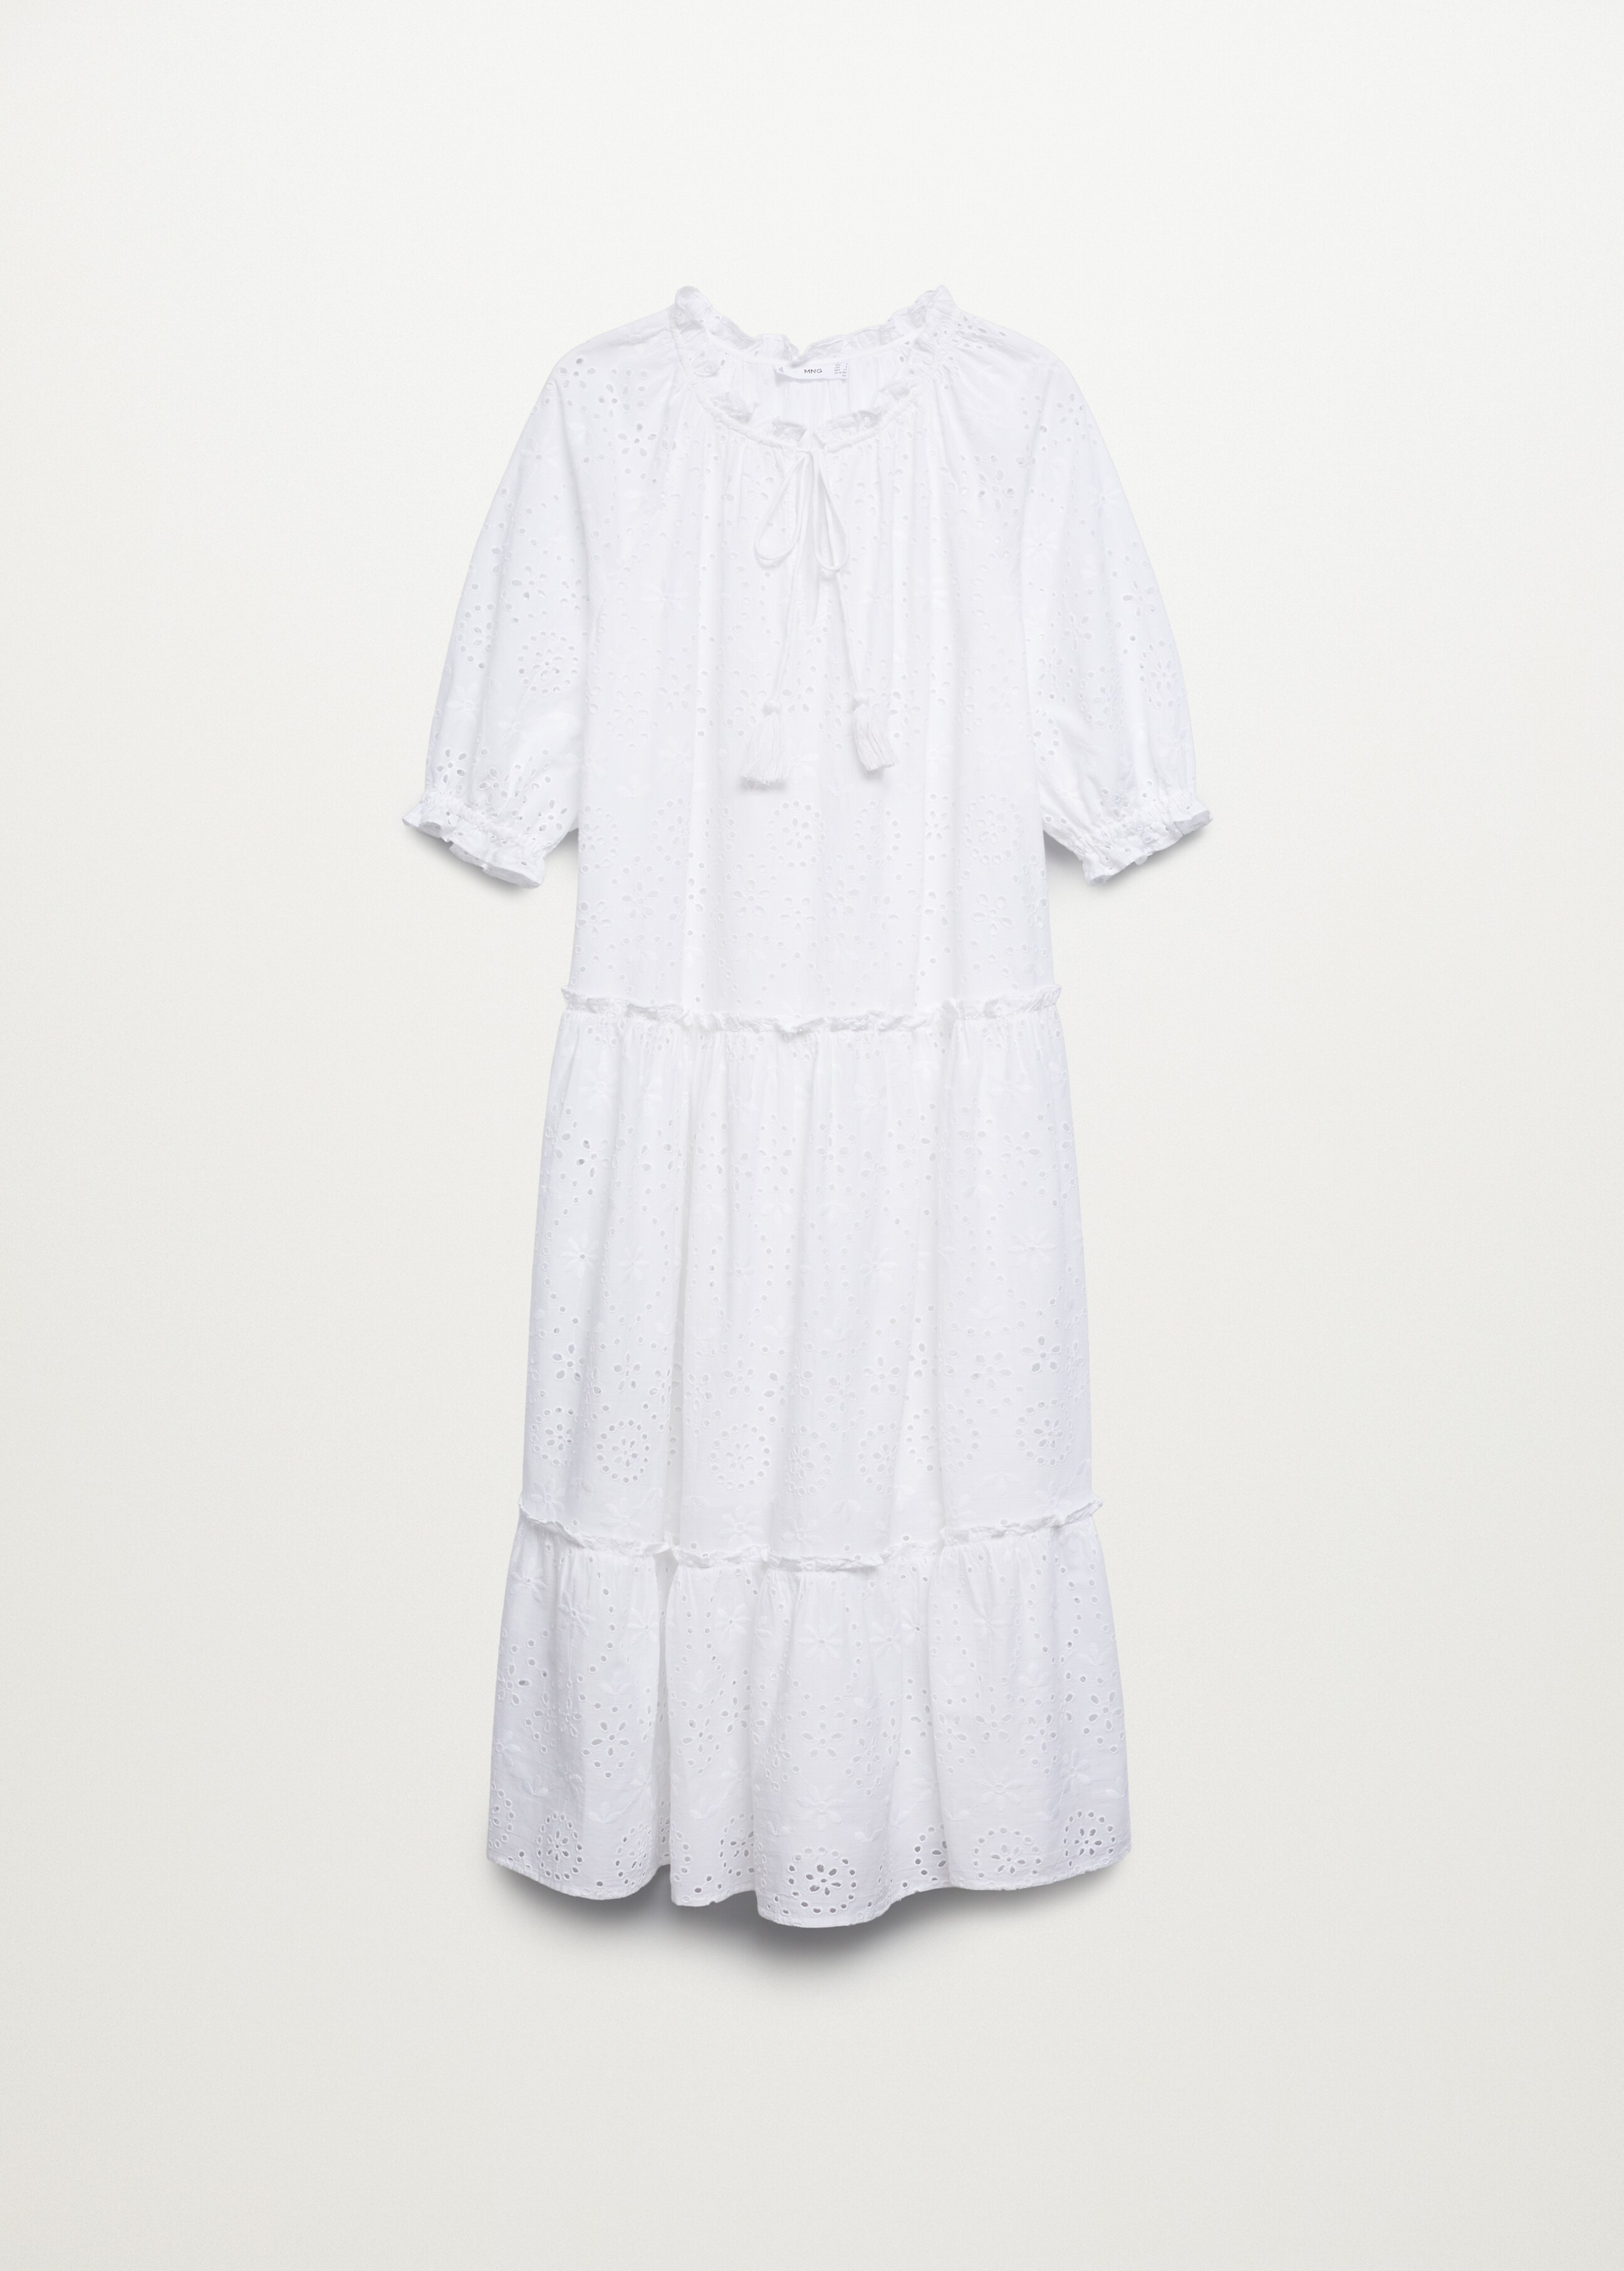 Broderie anglaise cotton dress - Article without model